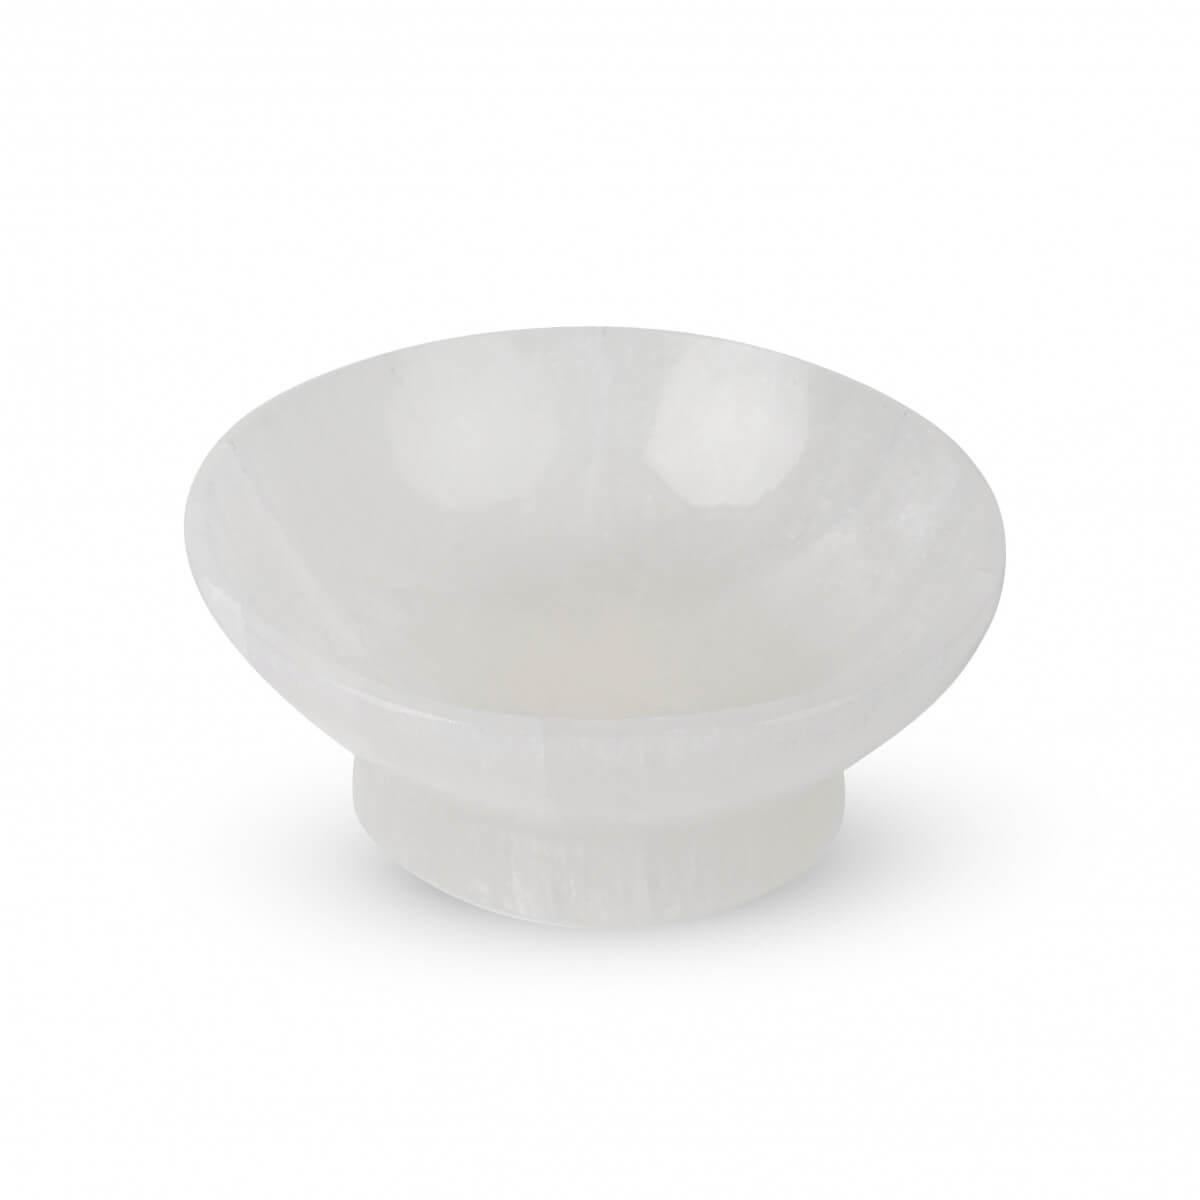 selenite bowl used in gift box experience